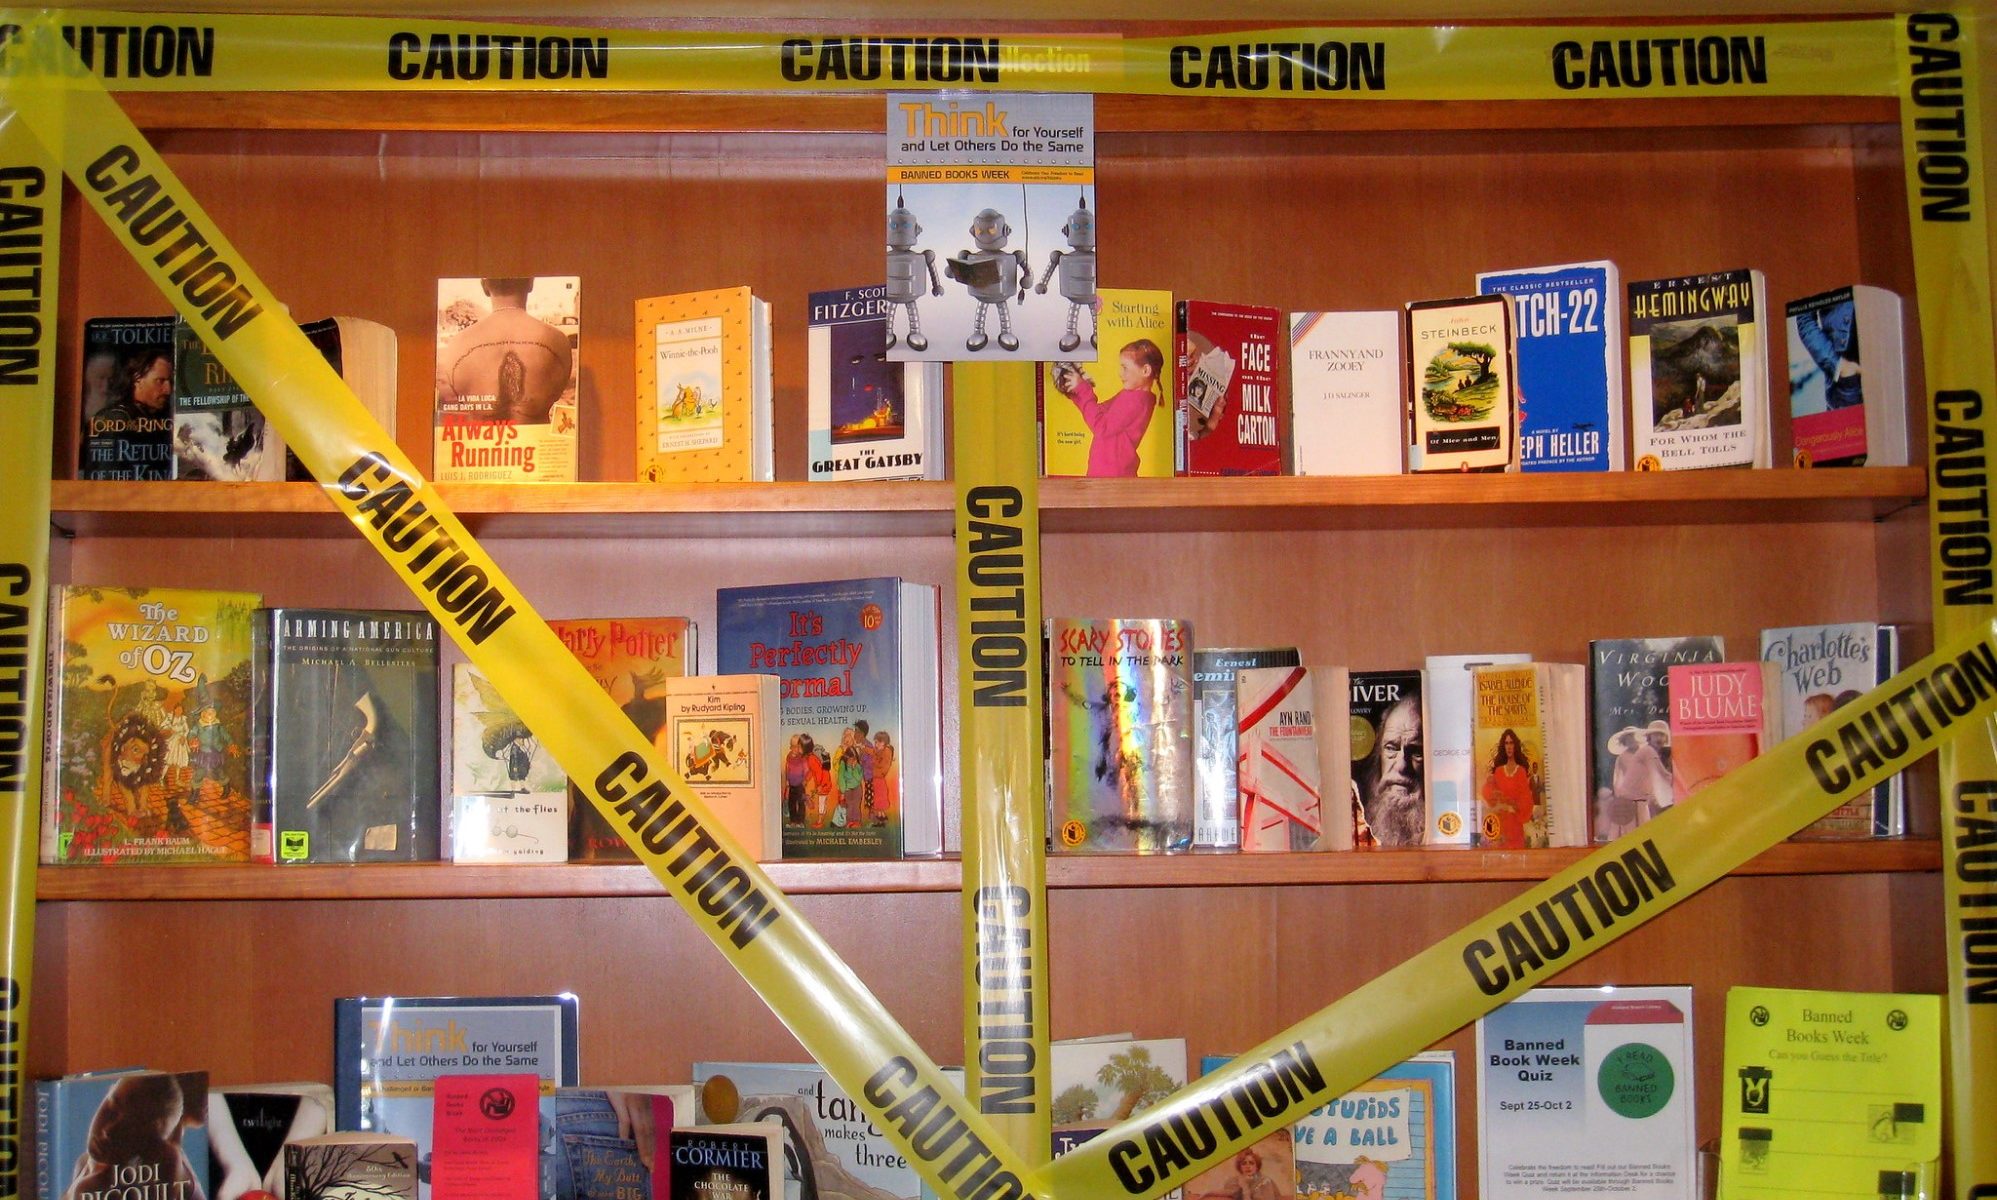 photograph of banned book display in public library